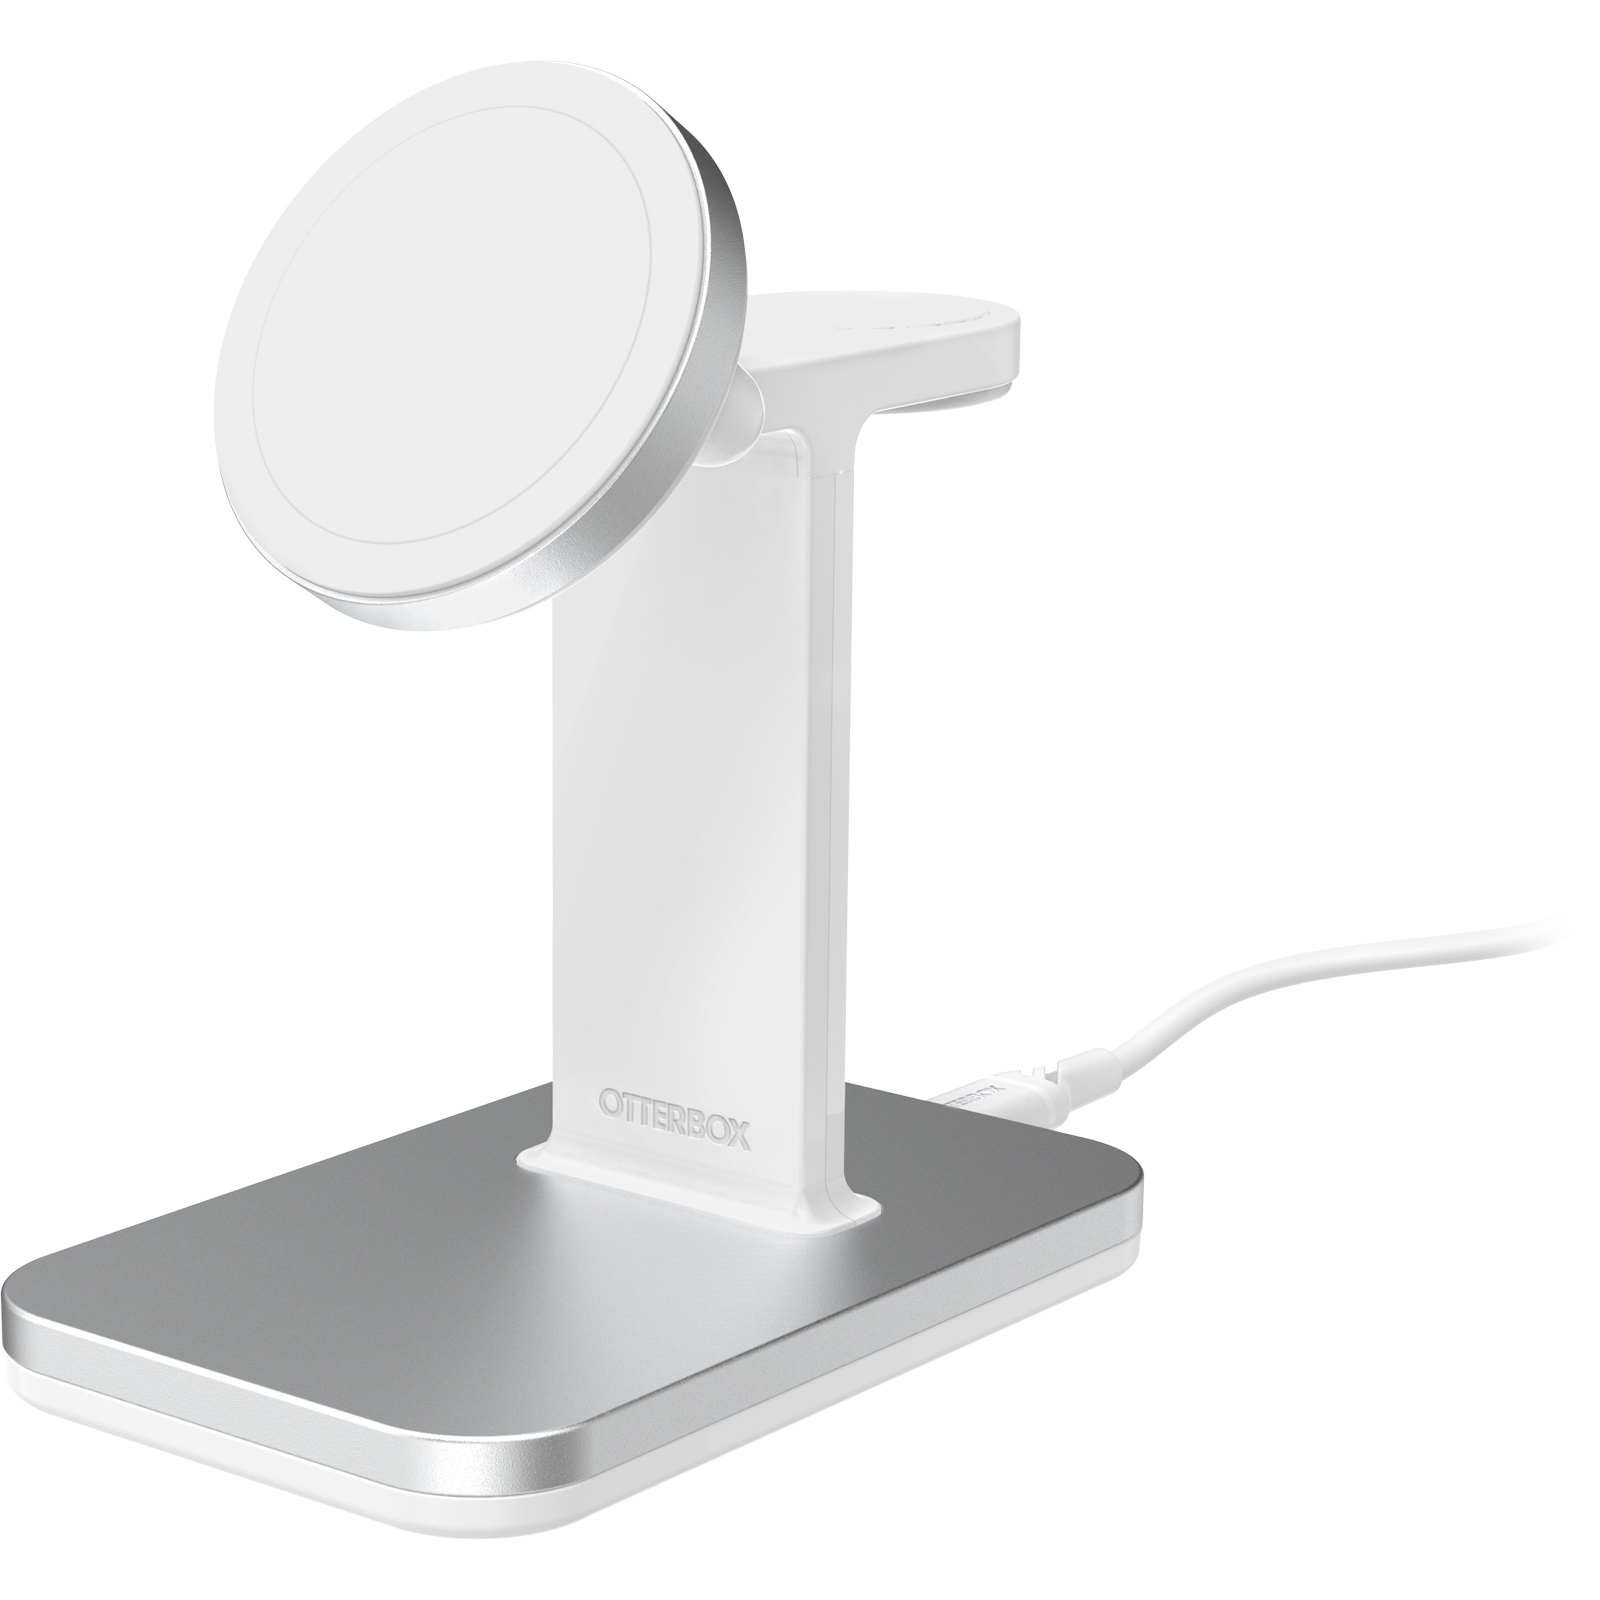 2-in-1 Charging Station for MagSafe  Space saving, multi device charging  station